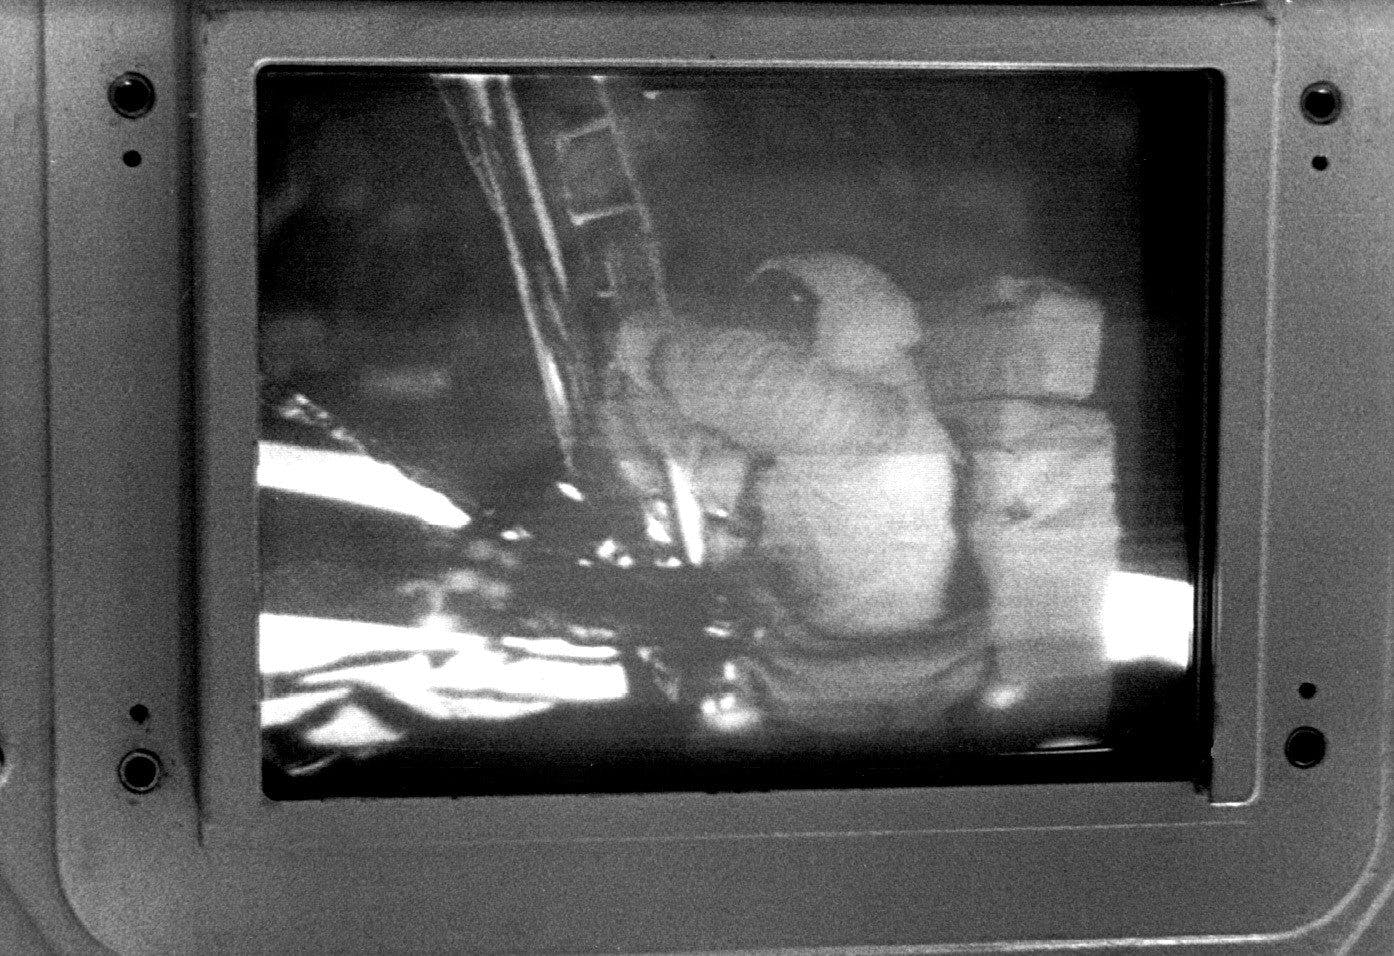 Photograph of a monitor at the Honeysuckle Creek tracking station in Australia where television images from the moon were received before being rebroadcast to networks. 